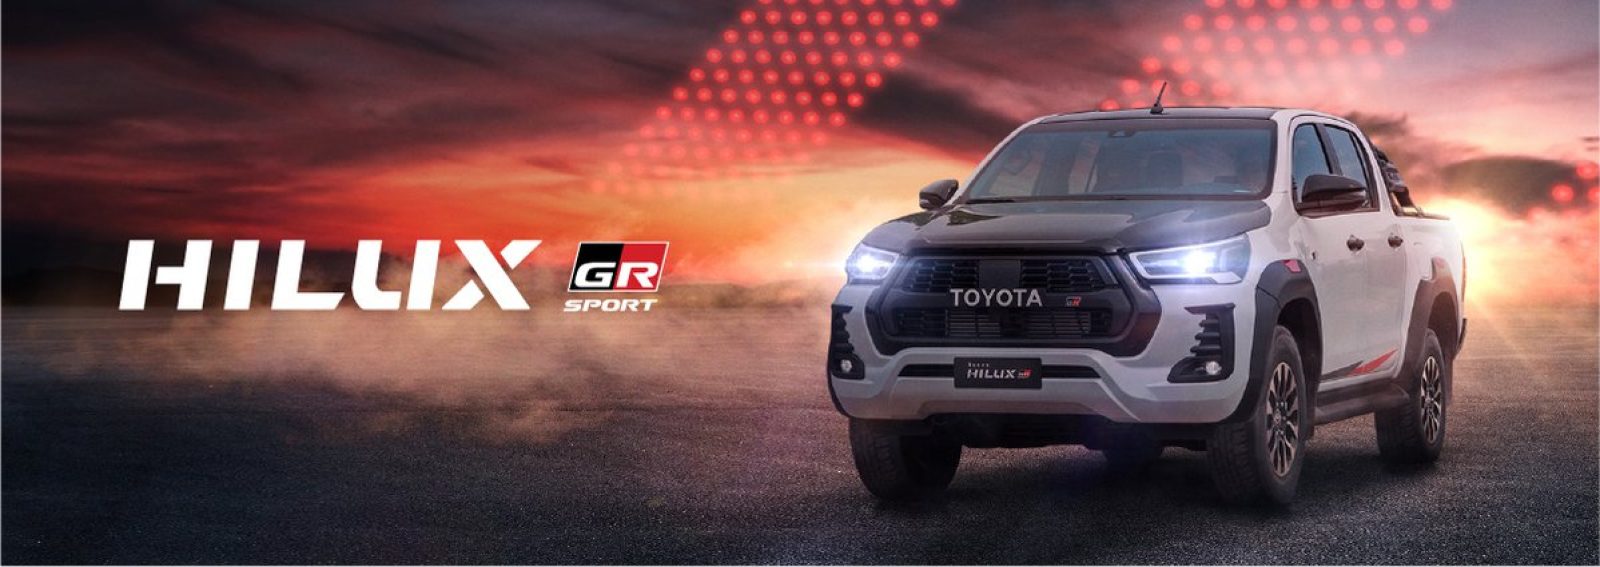 banner_hilux_1200x425.max-1200x425